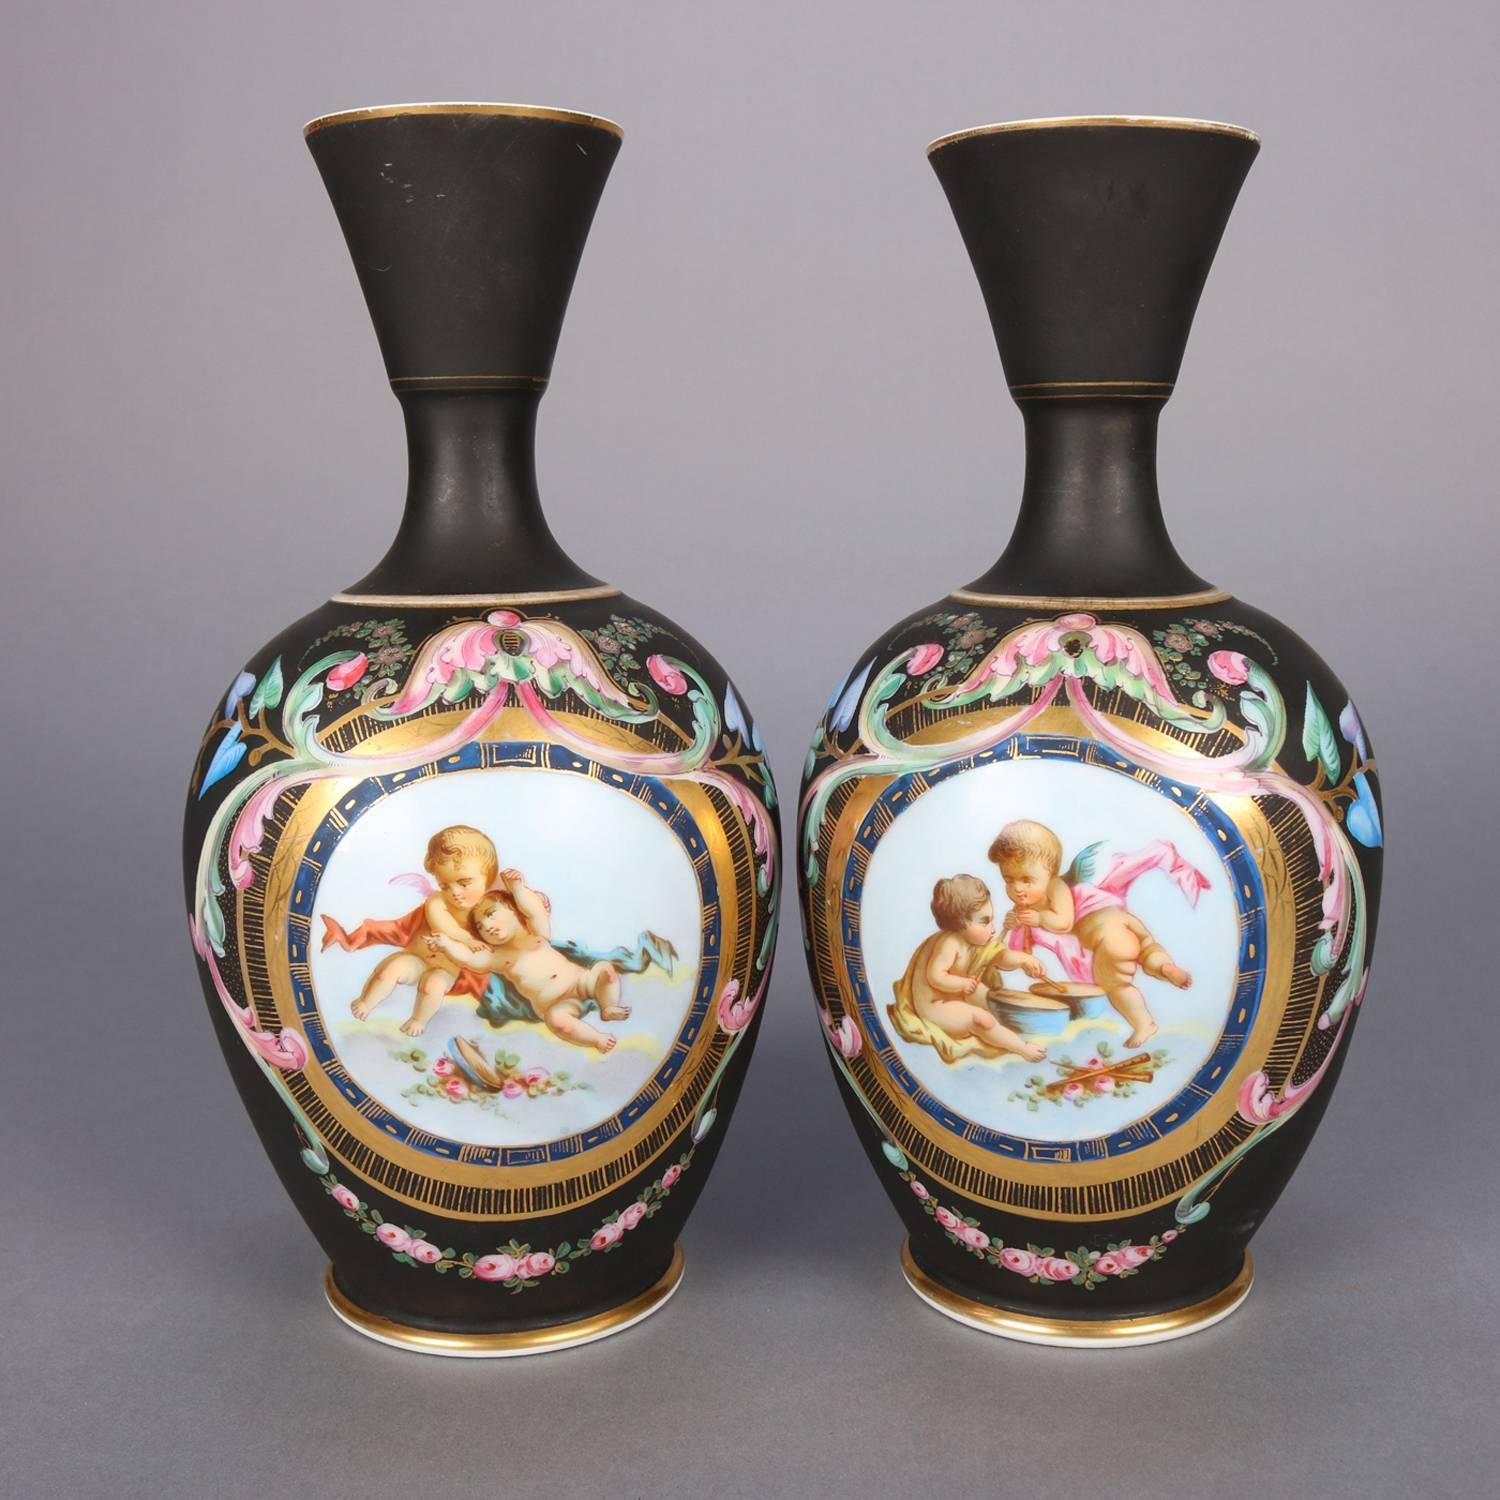 Two Antique French Classical Hand-Painted and Gilt Old Paris Porcelain Vases 1